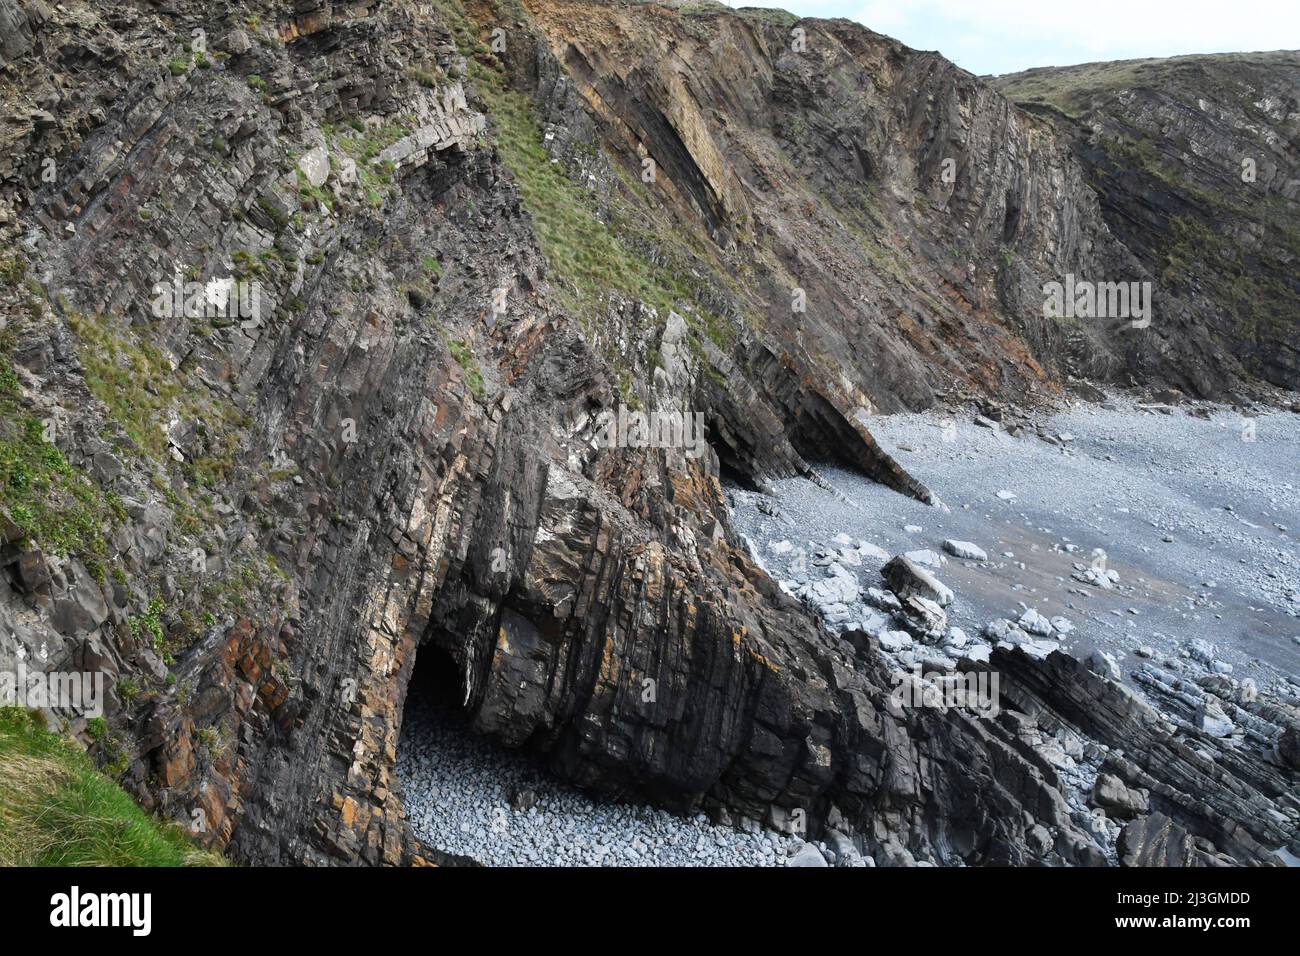 The cliffs showing the tortured strata at Hartland Quay in Devon displaying a spectacularl folded sequence of alternating grey shales and sandstones k Stock Photo